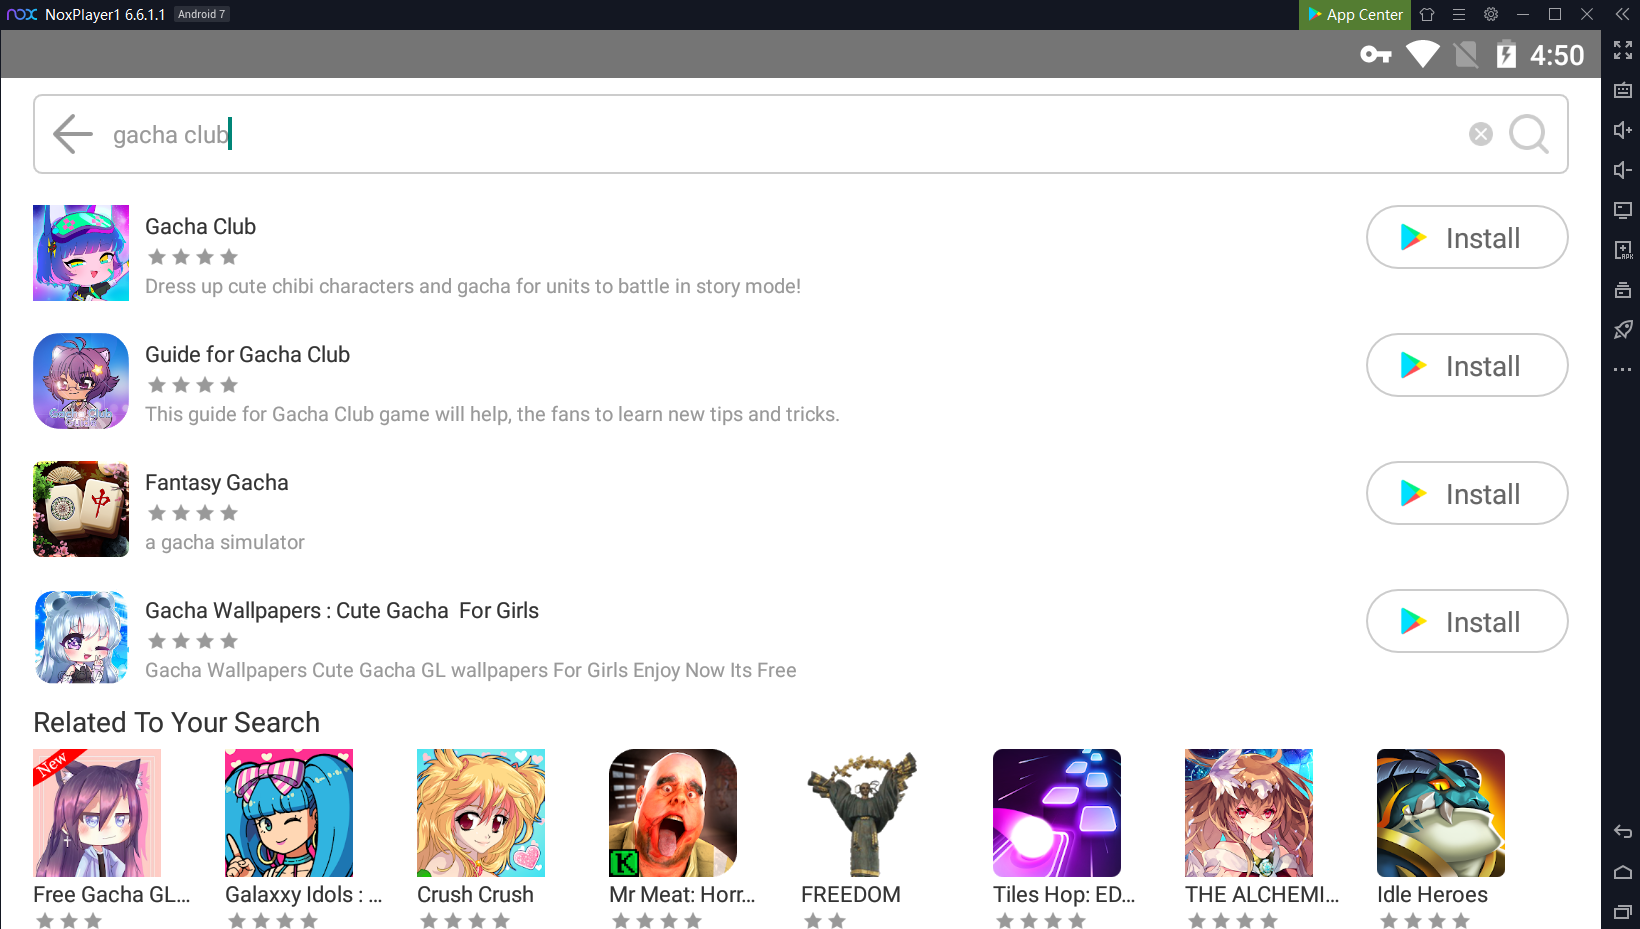 Download Gacha Preset android on PC